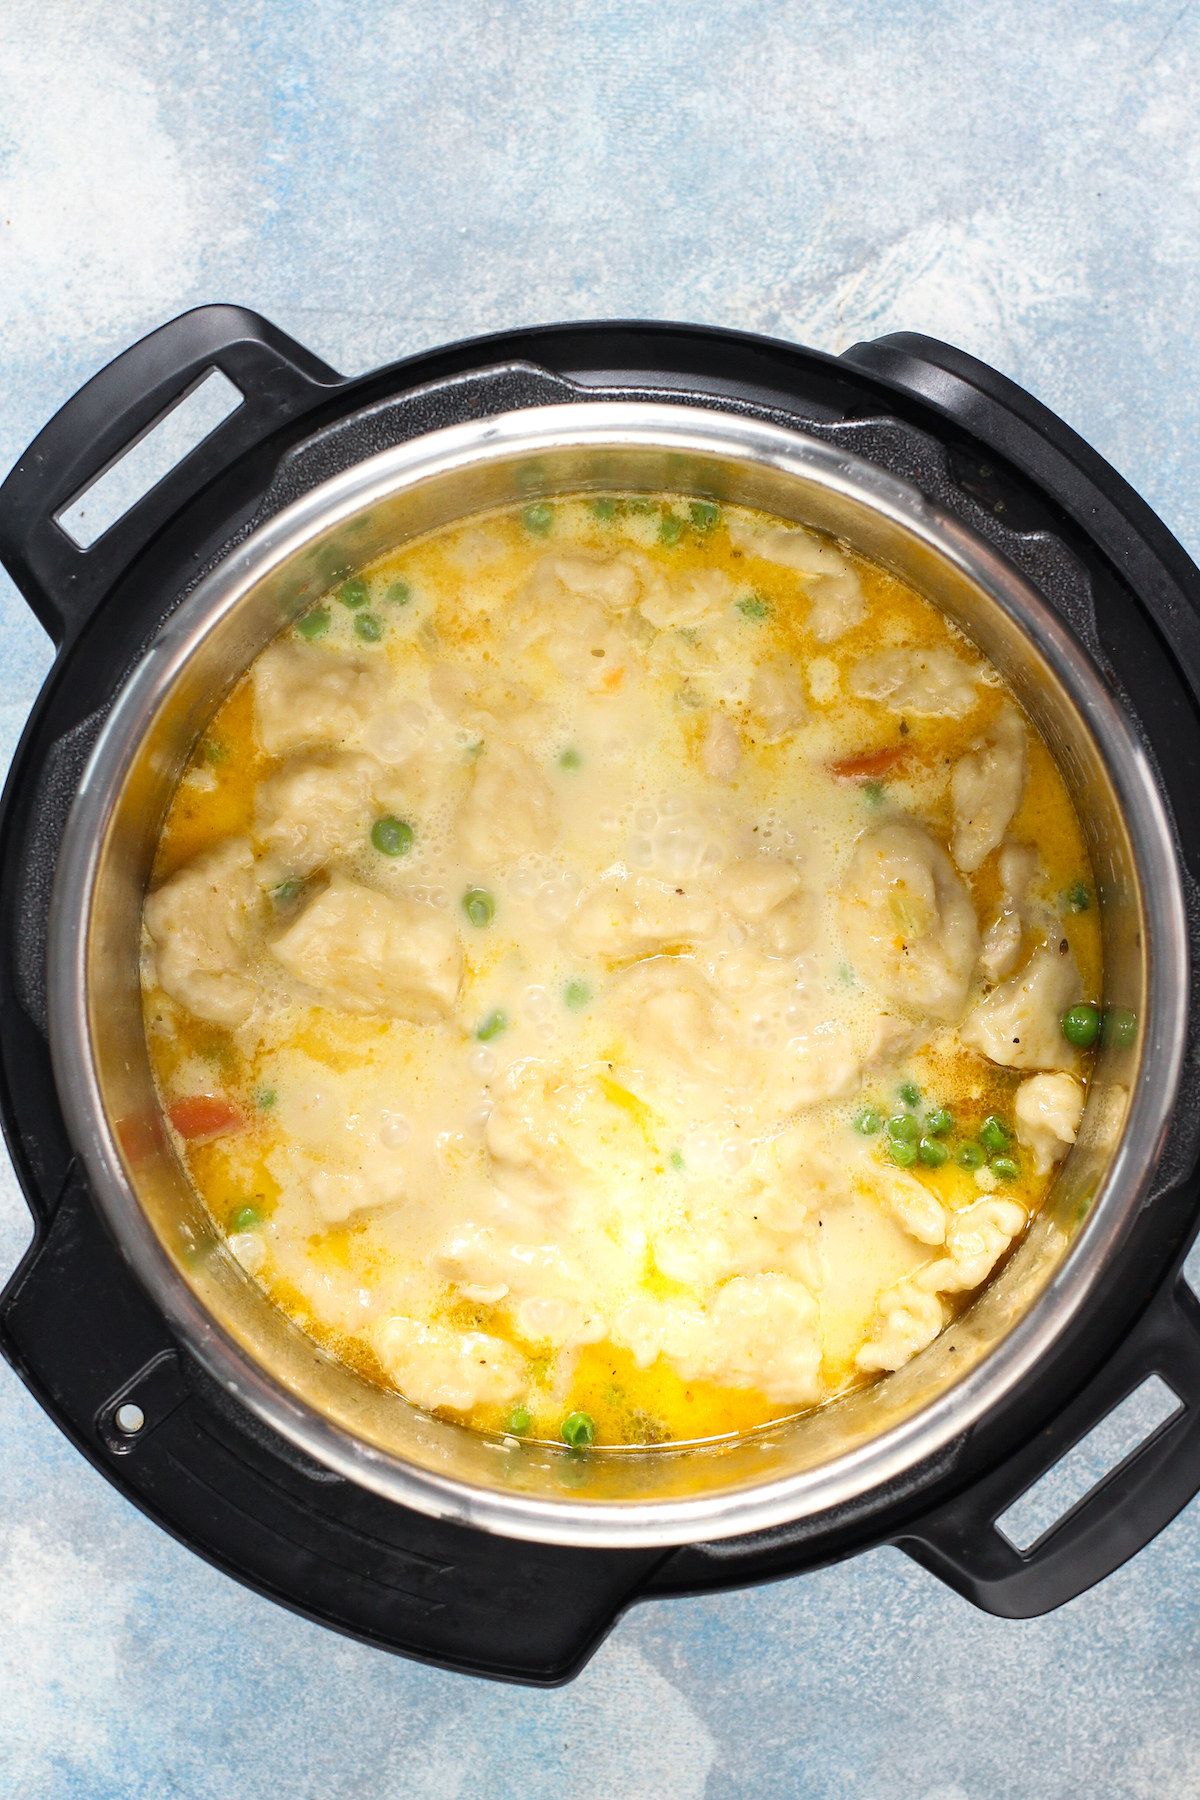 Chicken and dumplings with cream added.